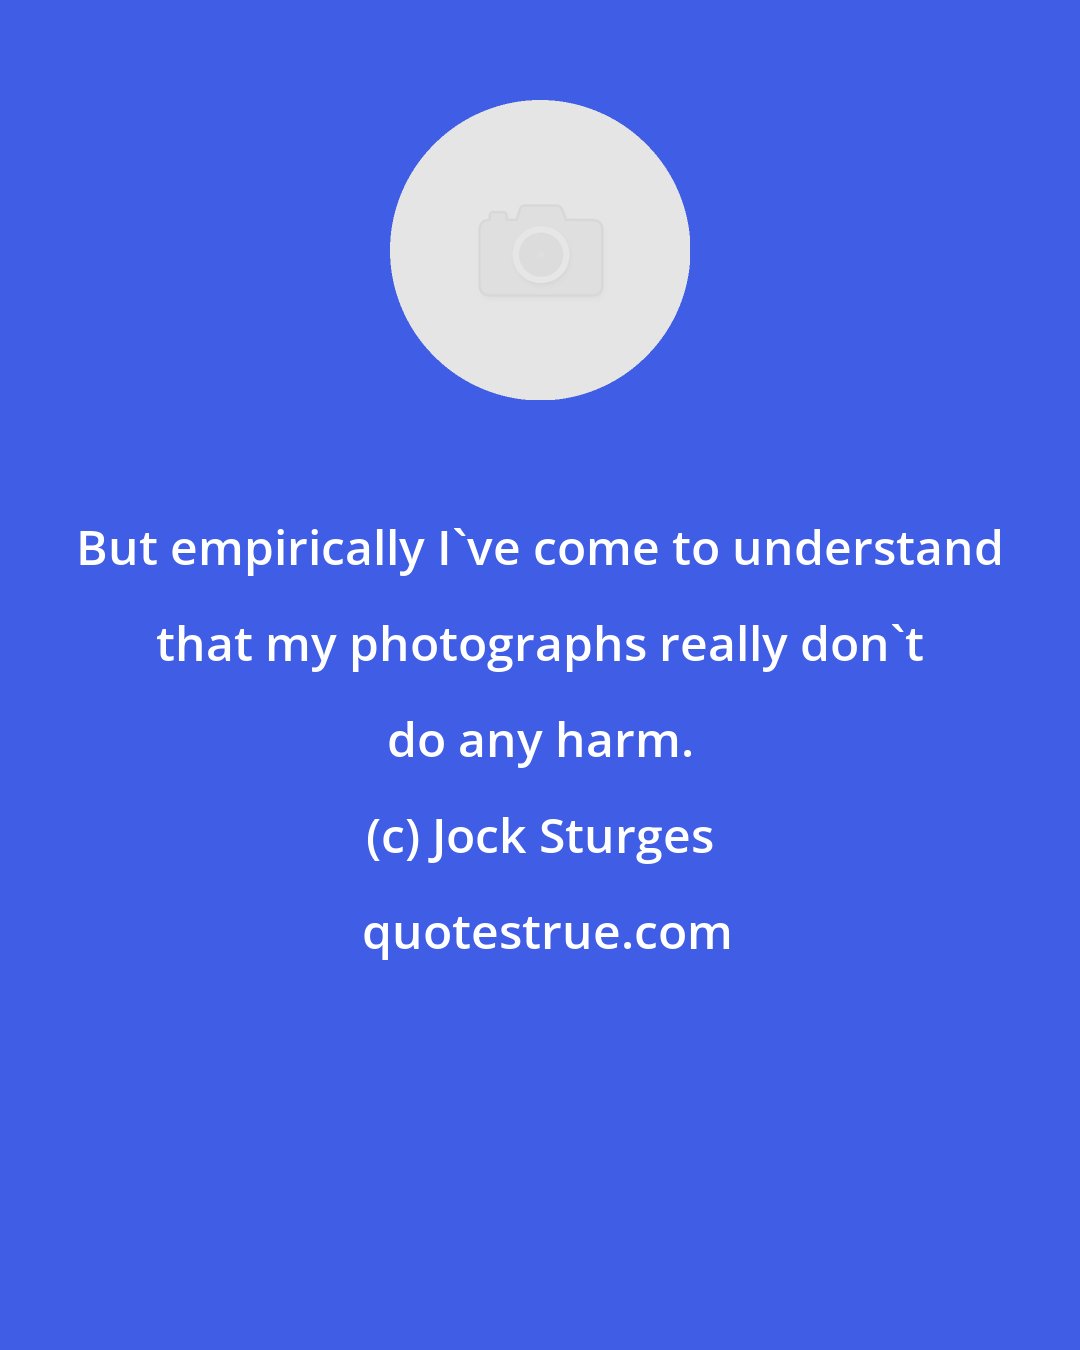 Jock Sturges: But empirically I've come to understand that my photographs really don't do any harm.